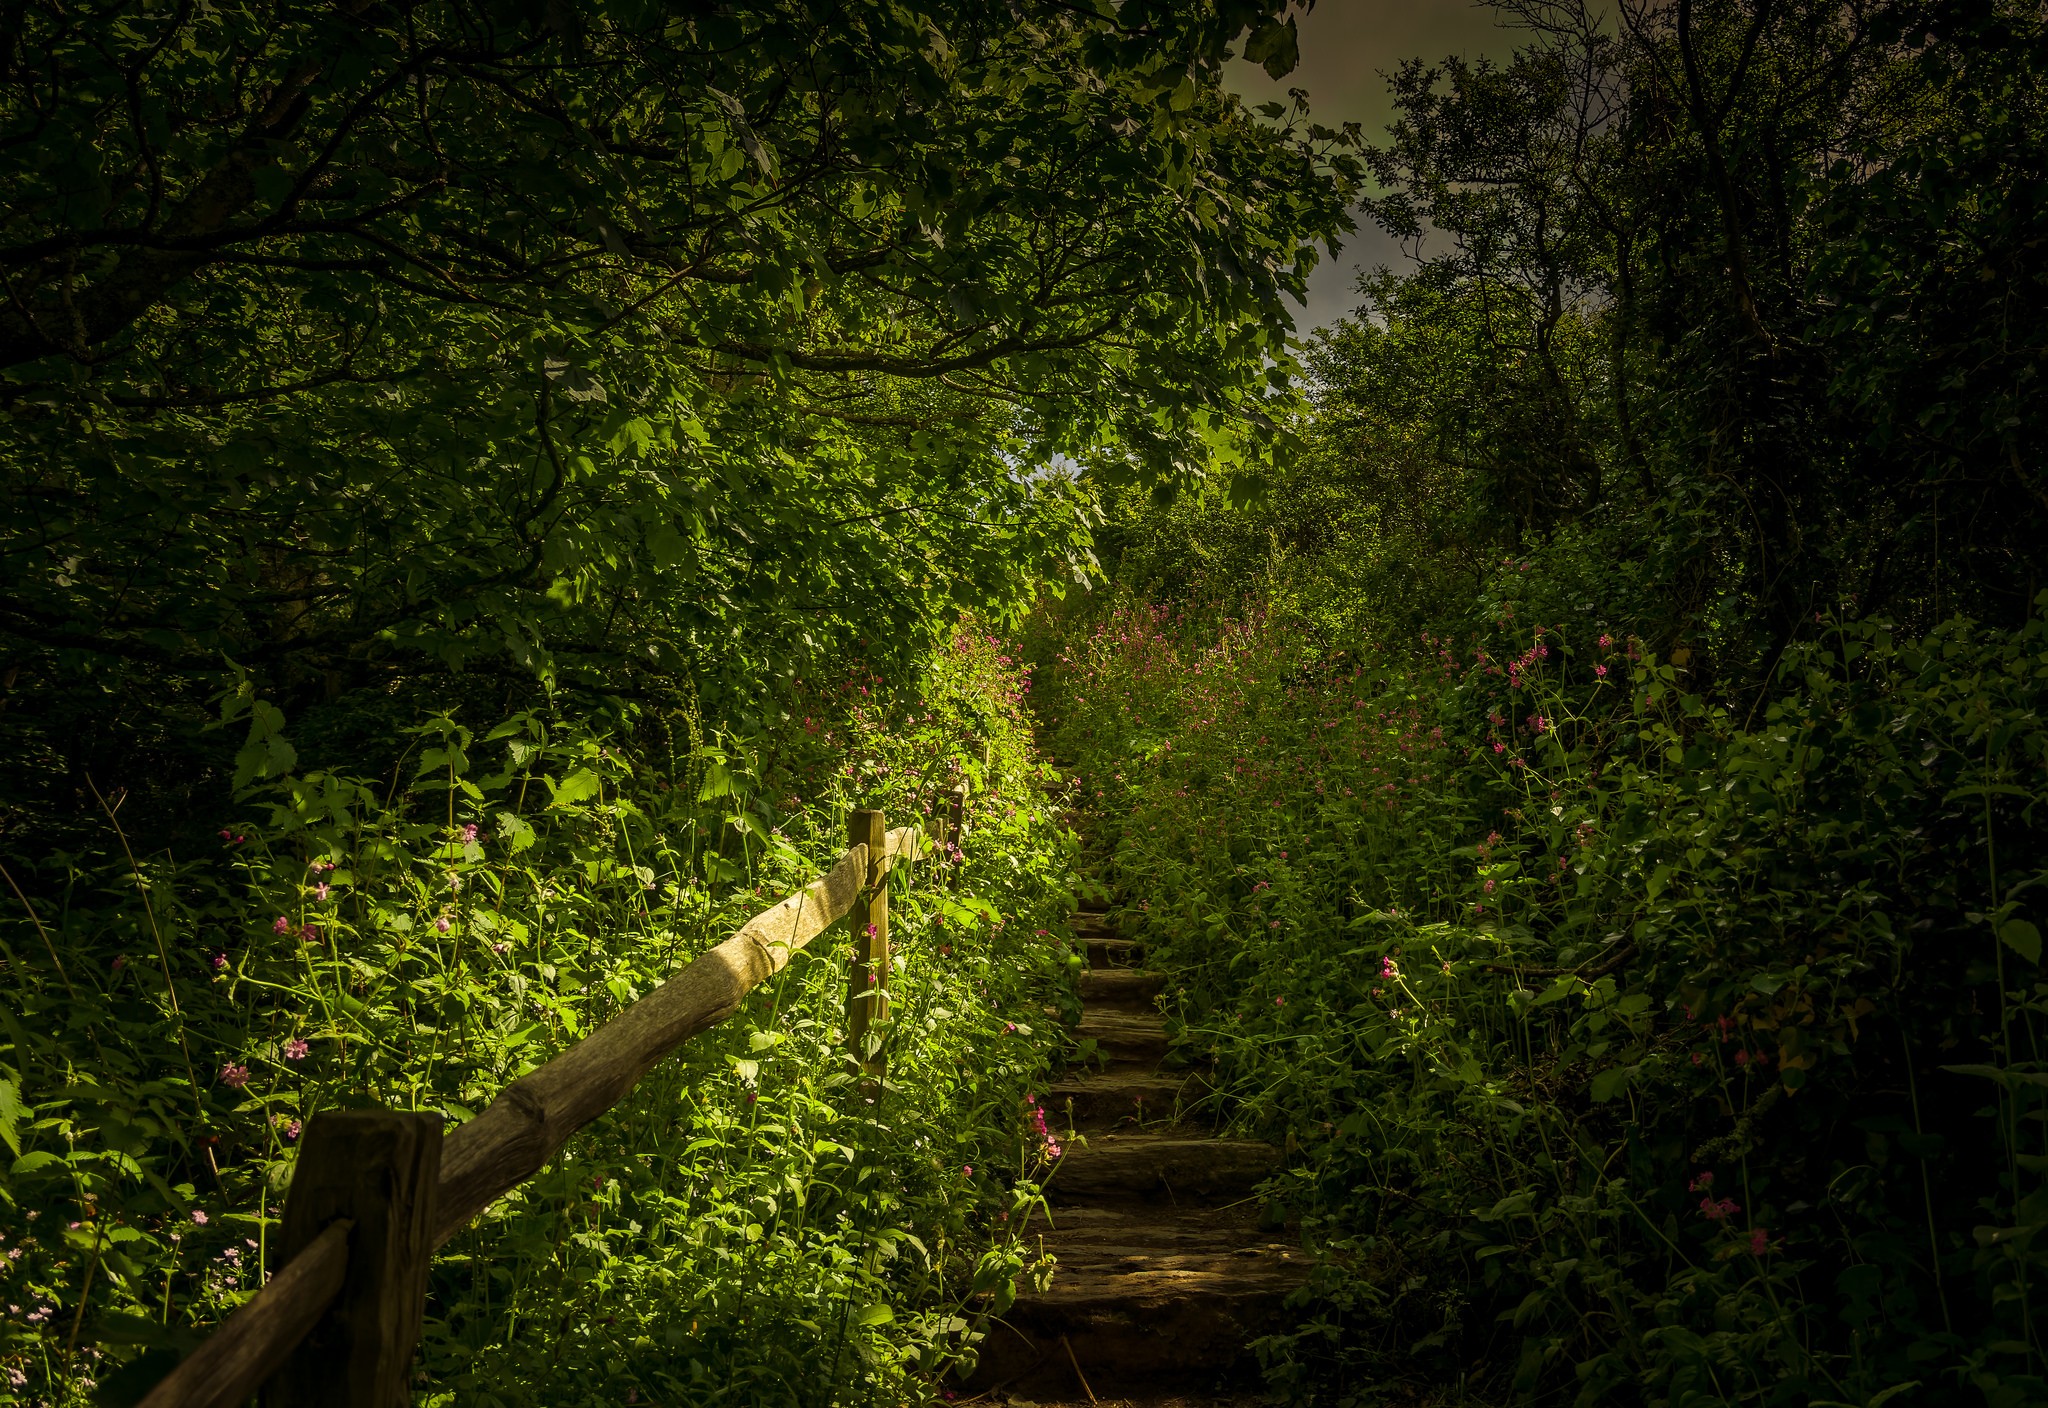 General 2048x1408 photography nature trees forest wood flowers ladder path